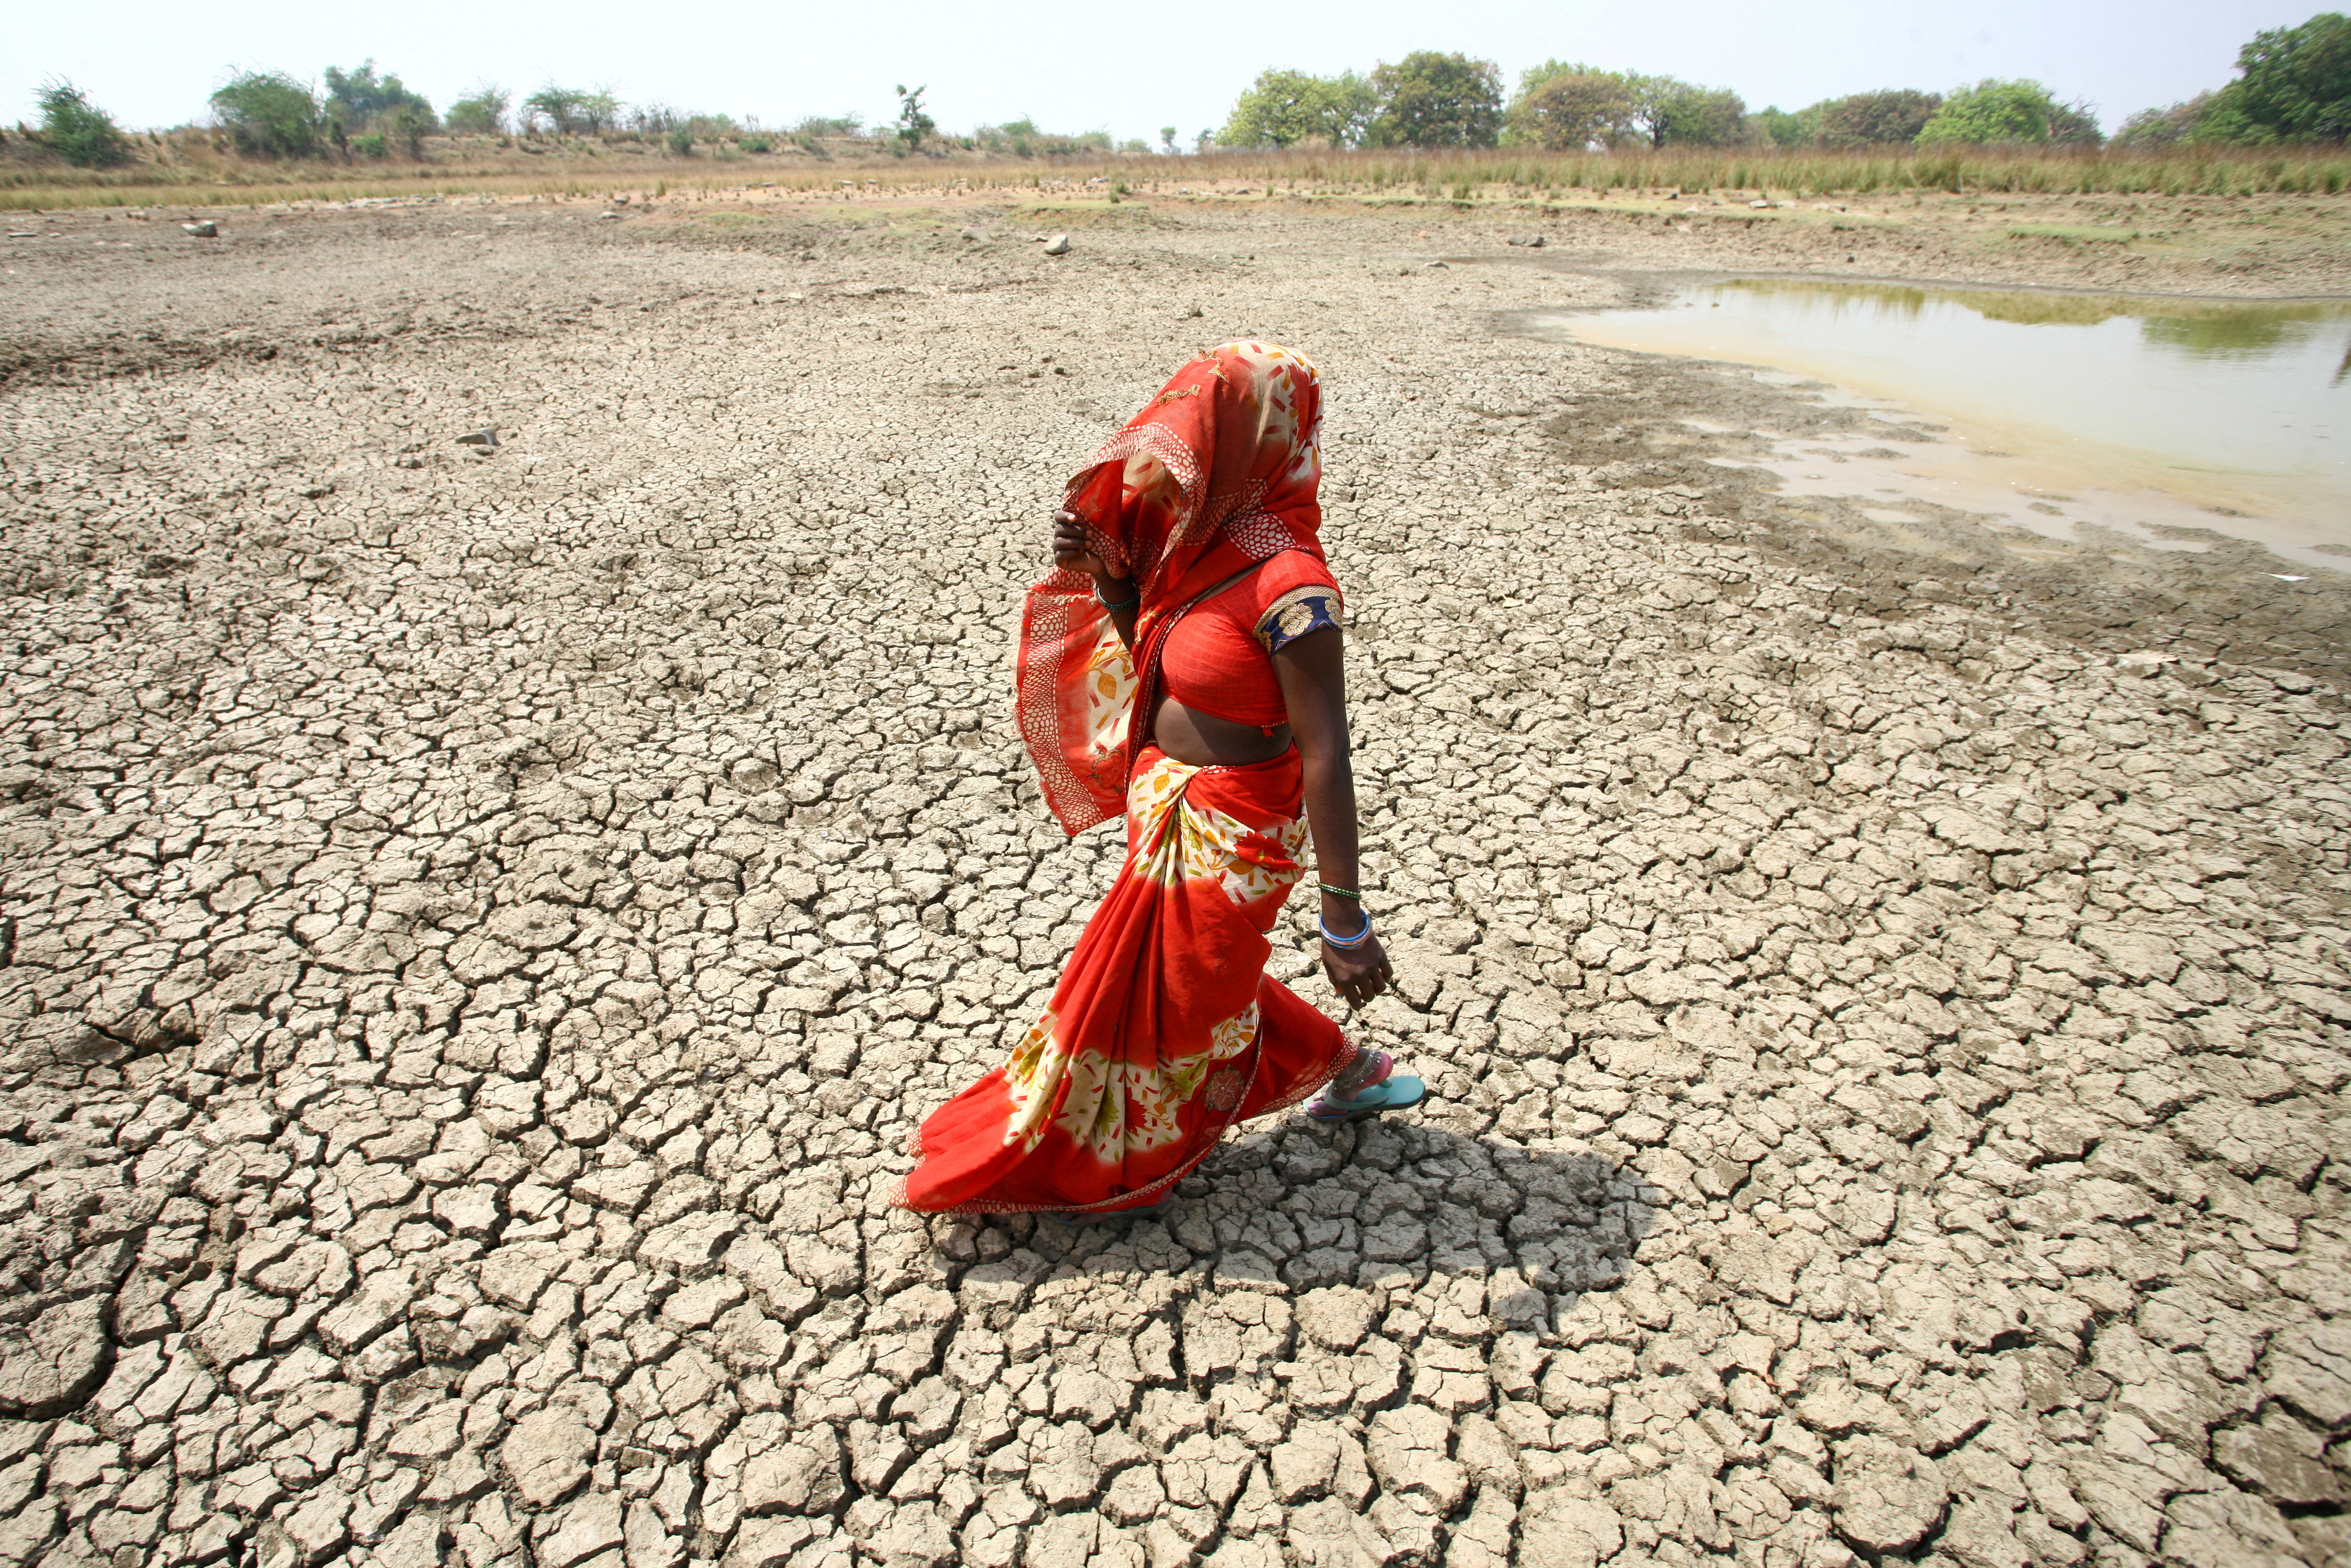 A woman walks on the bottom of a dried pond on a hot day in Mauharia village